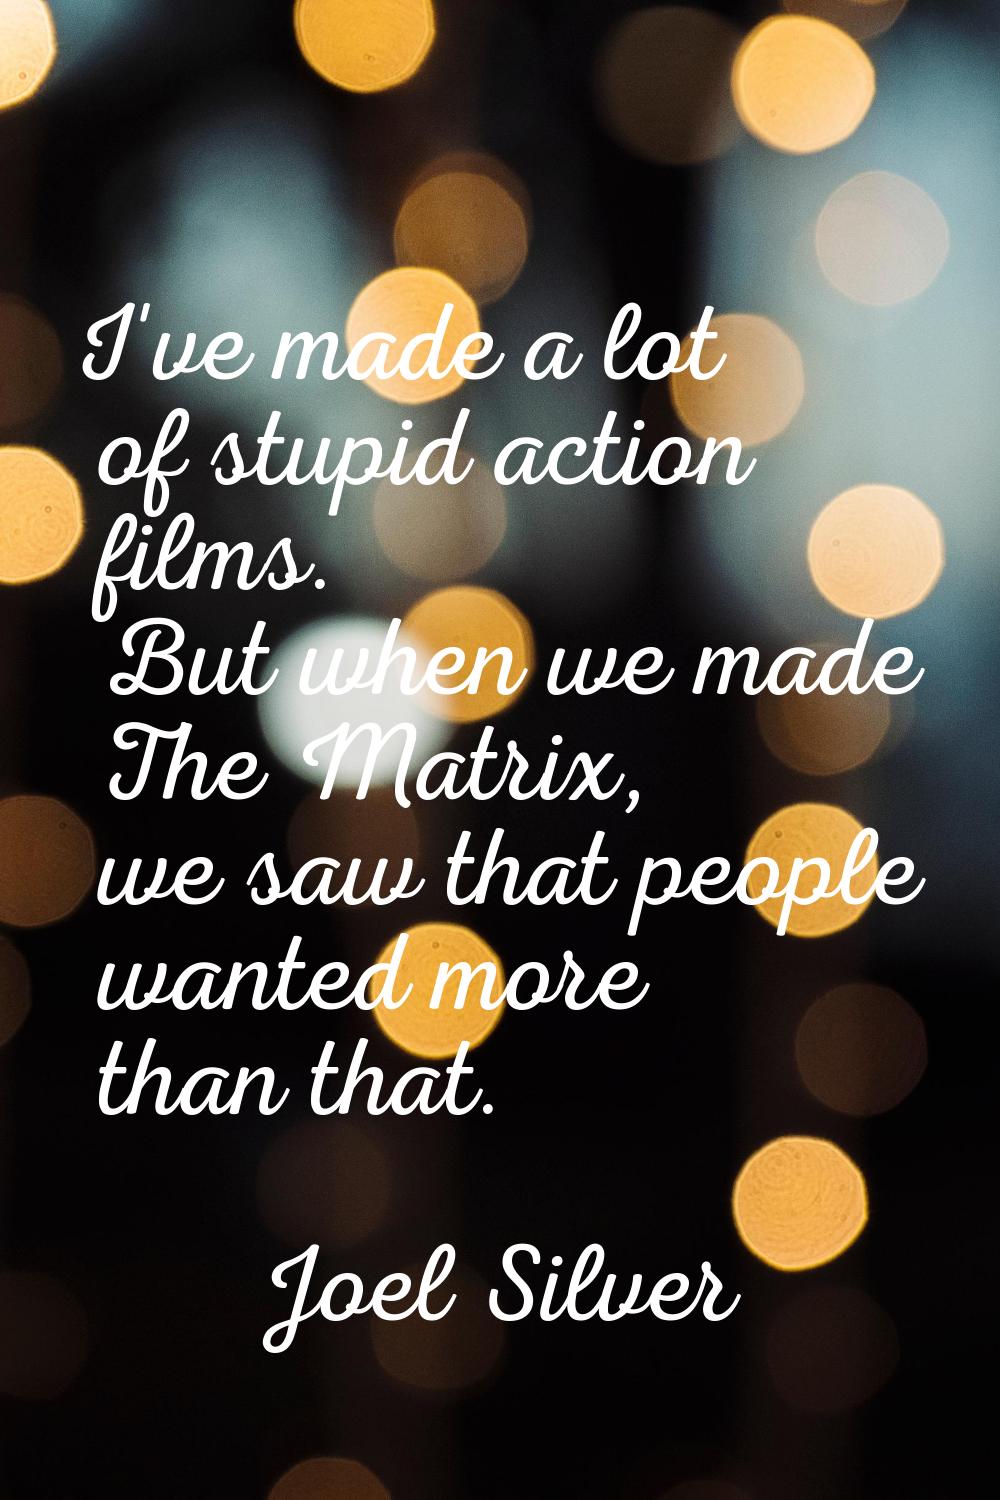 I've made a lot of stupid action films. But when we made The Matrix, we saw that people wanted more